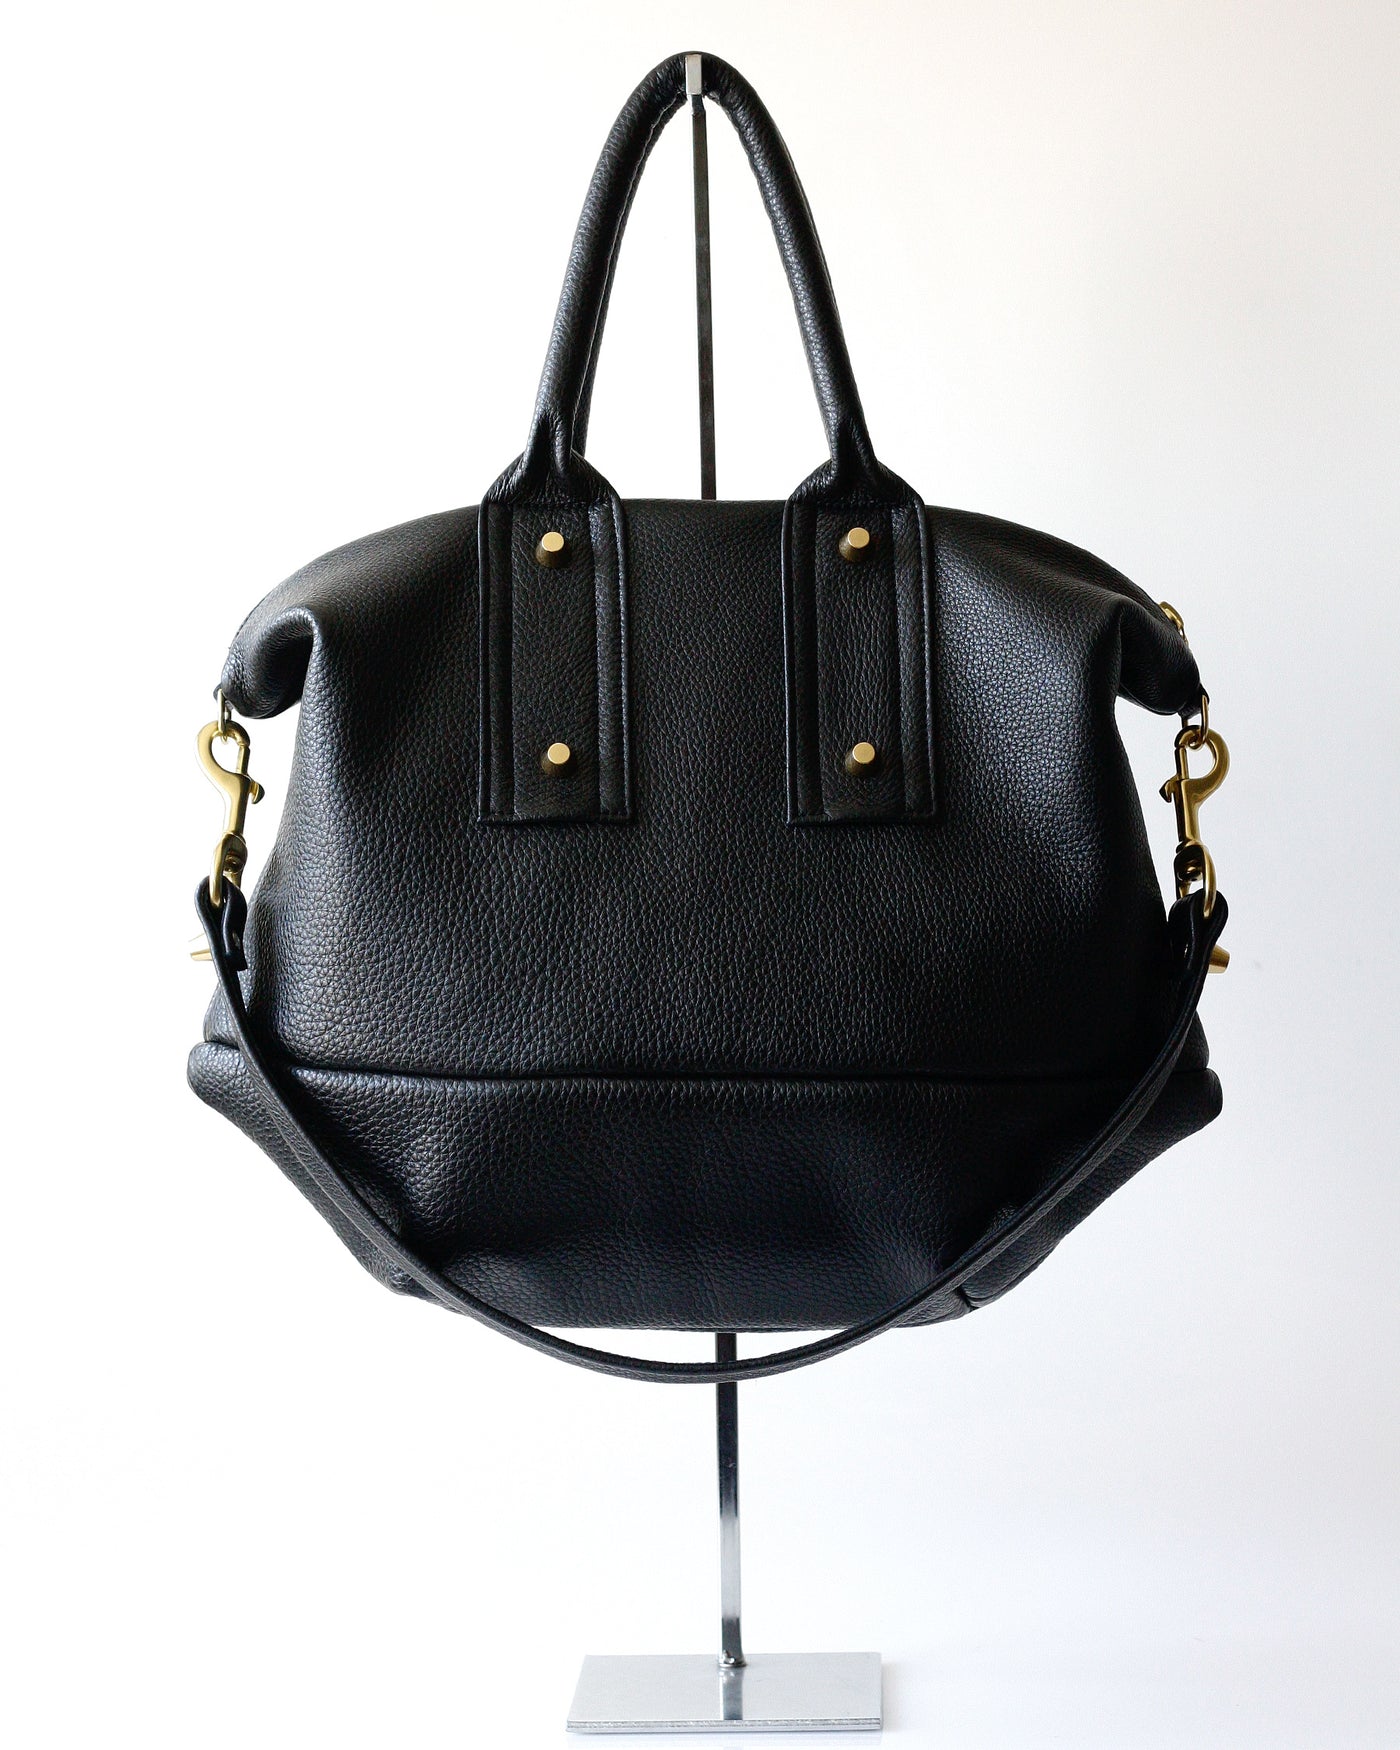 Vanda - Opelle bag Permanent Collection - Opelle leather handbag handcrafted leather bag toronto Canada